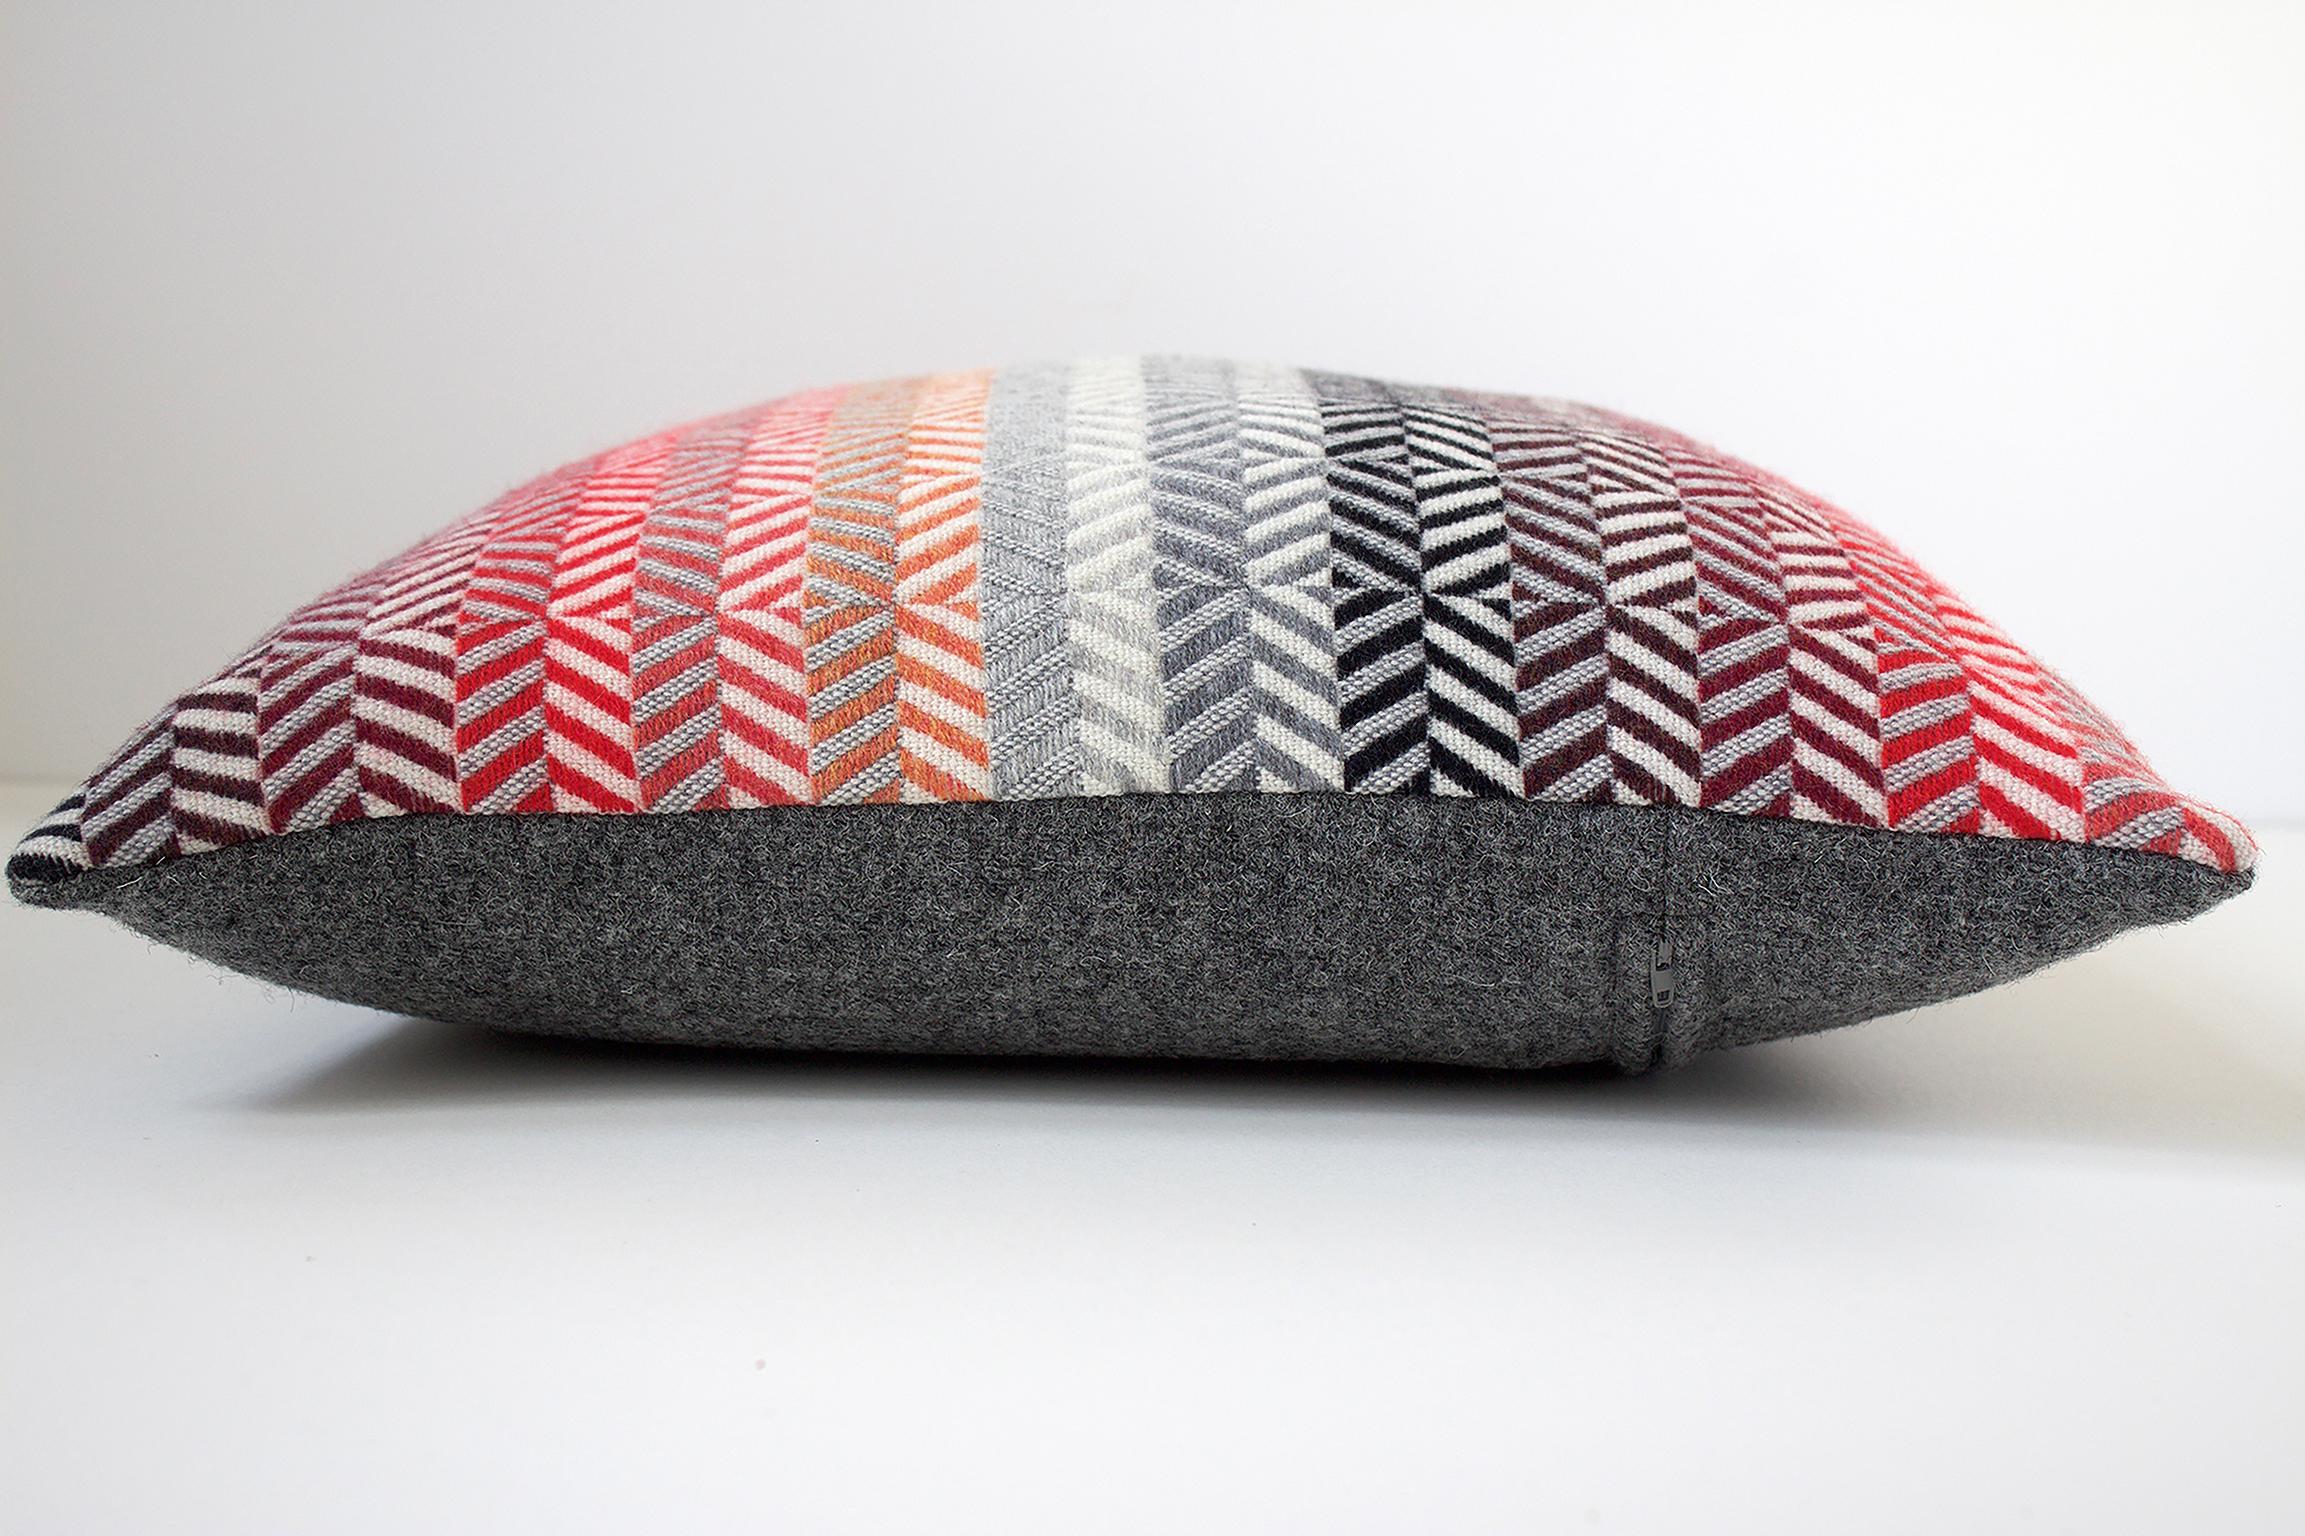 Hand-Woven Handwoven 'Saint Gilles' Merino Wool Cushion Pillow, Red/Pink/Greys For Sale